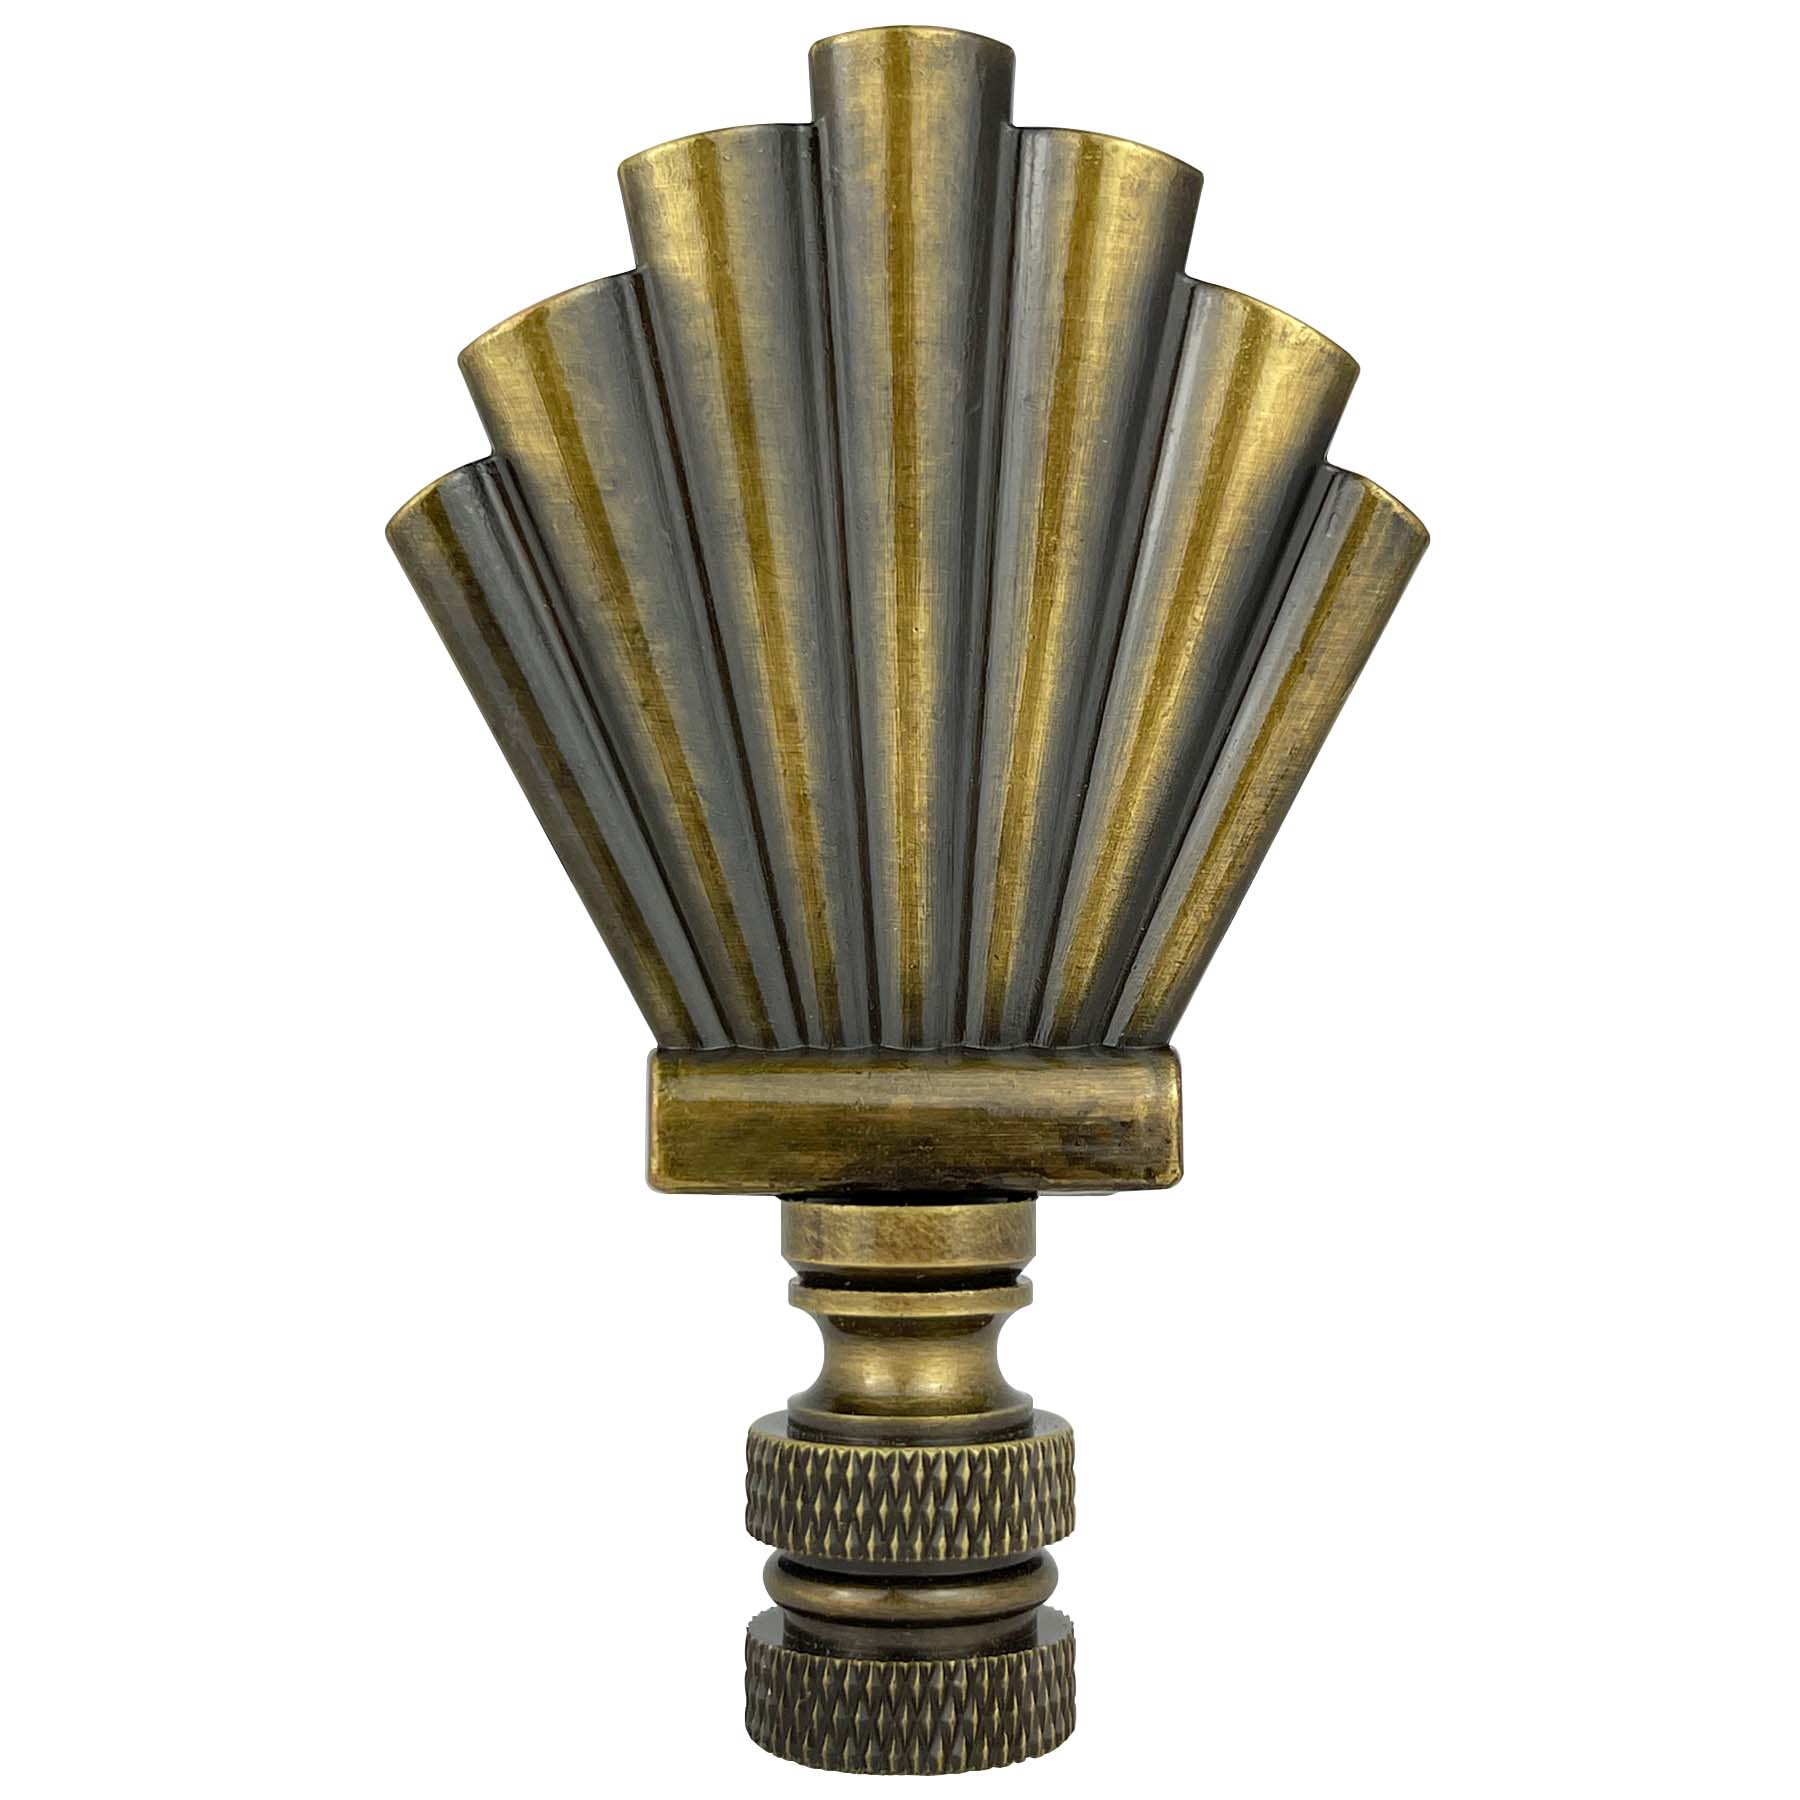 Royal Designs Oriental Happiness Symbol Lamp Finial for Lamp Shade-Antique Brass 